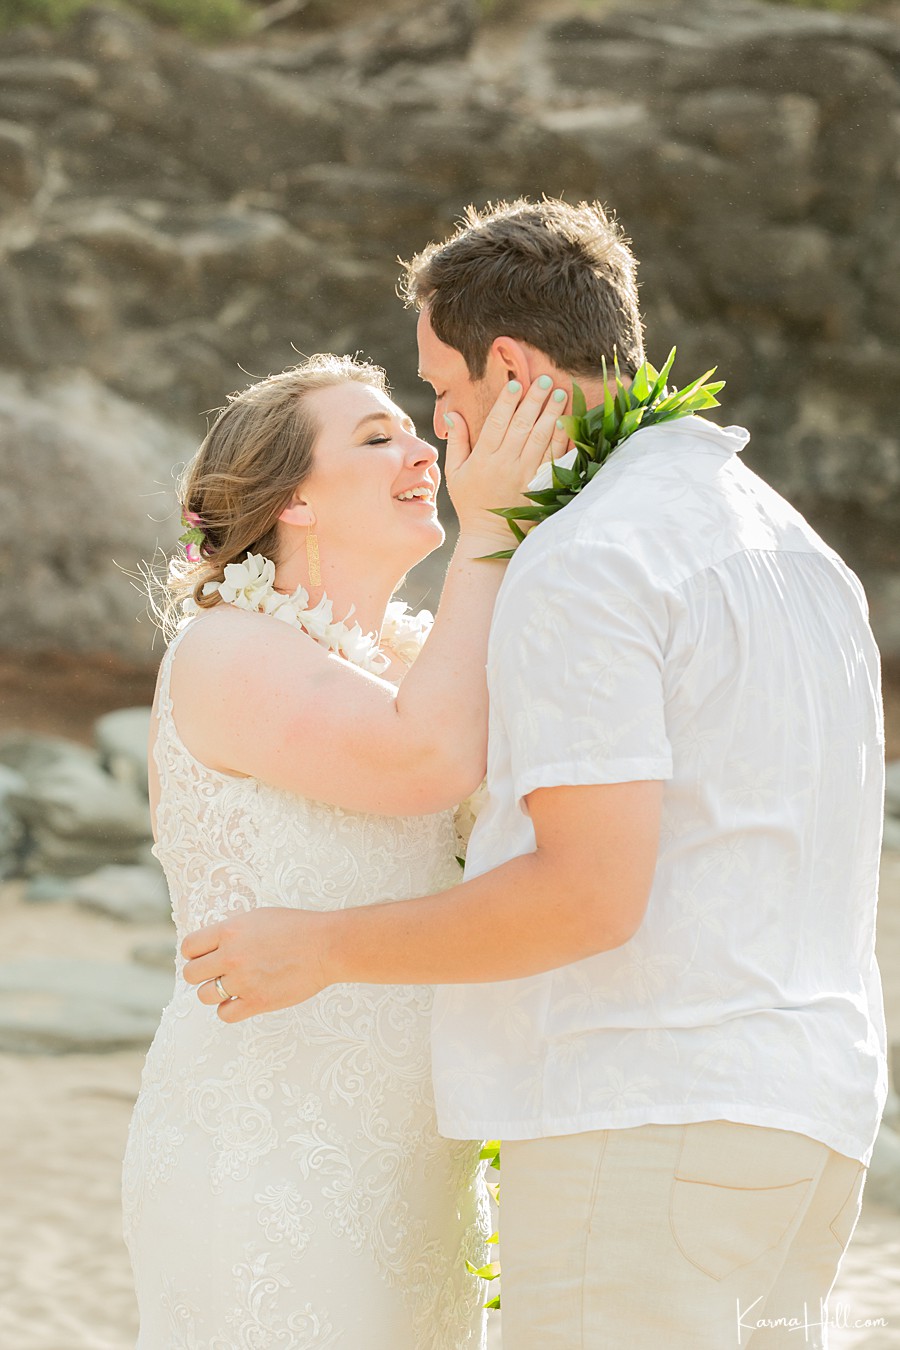 vow renewal in Maui 